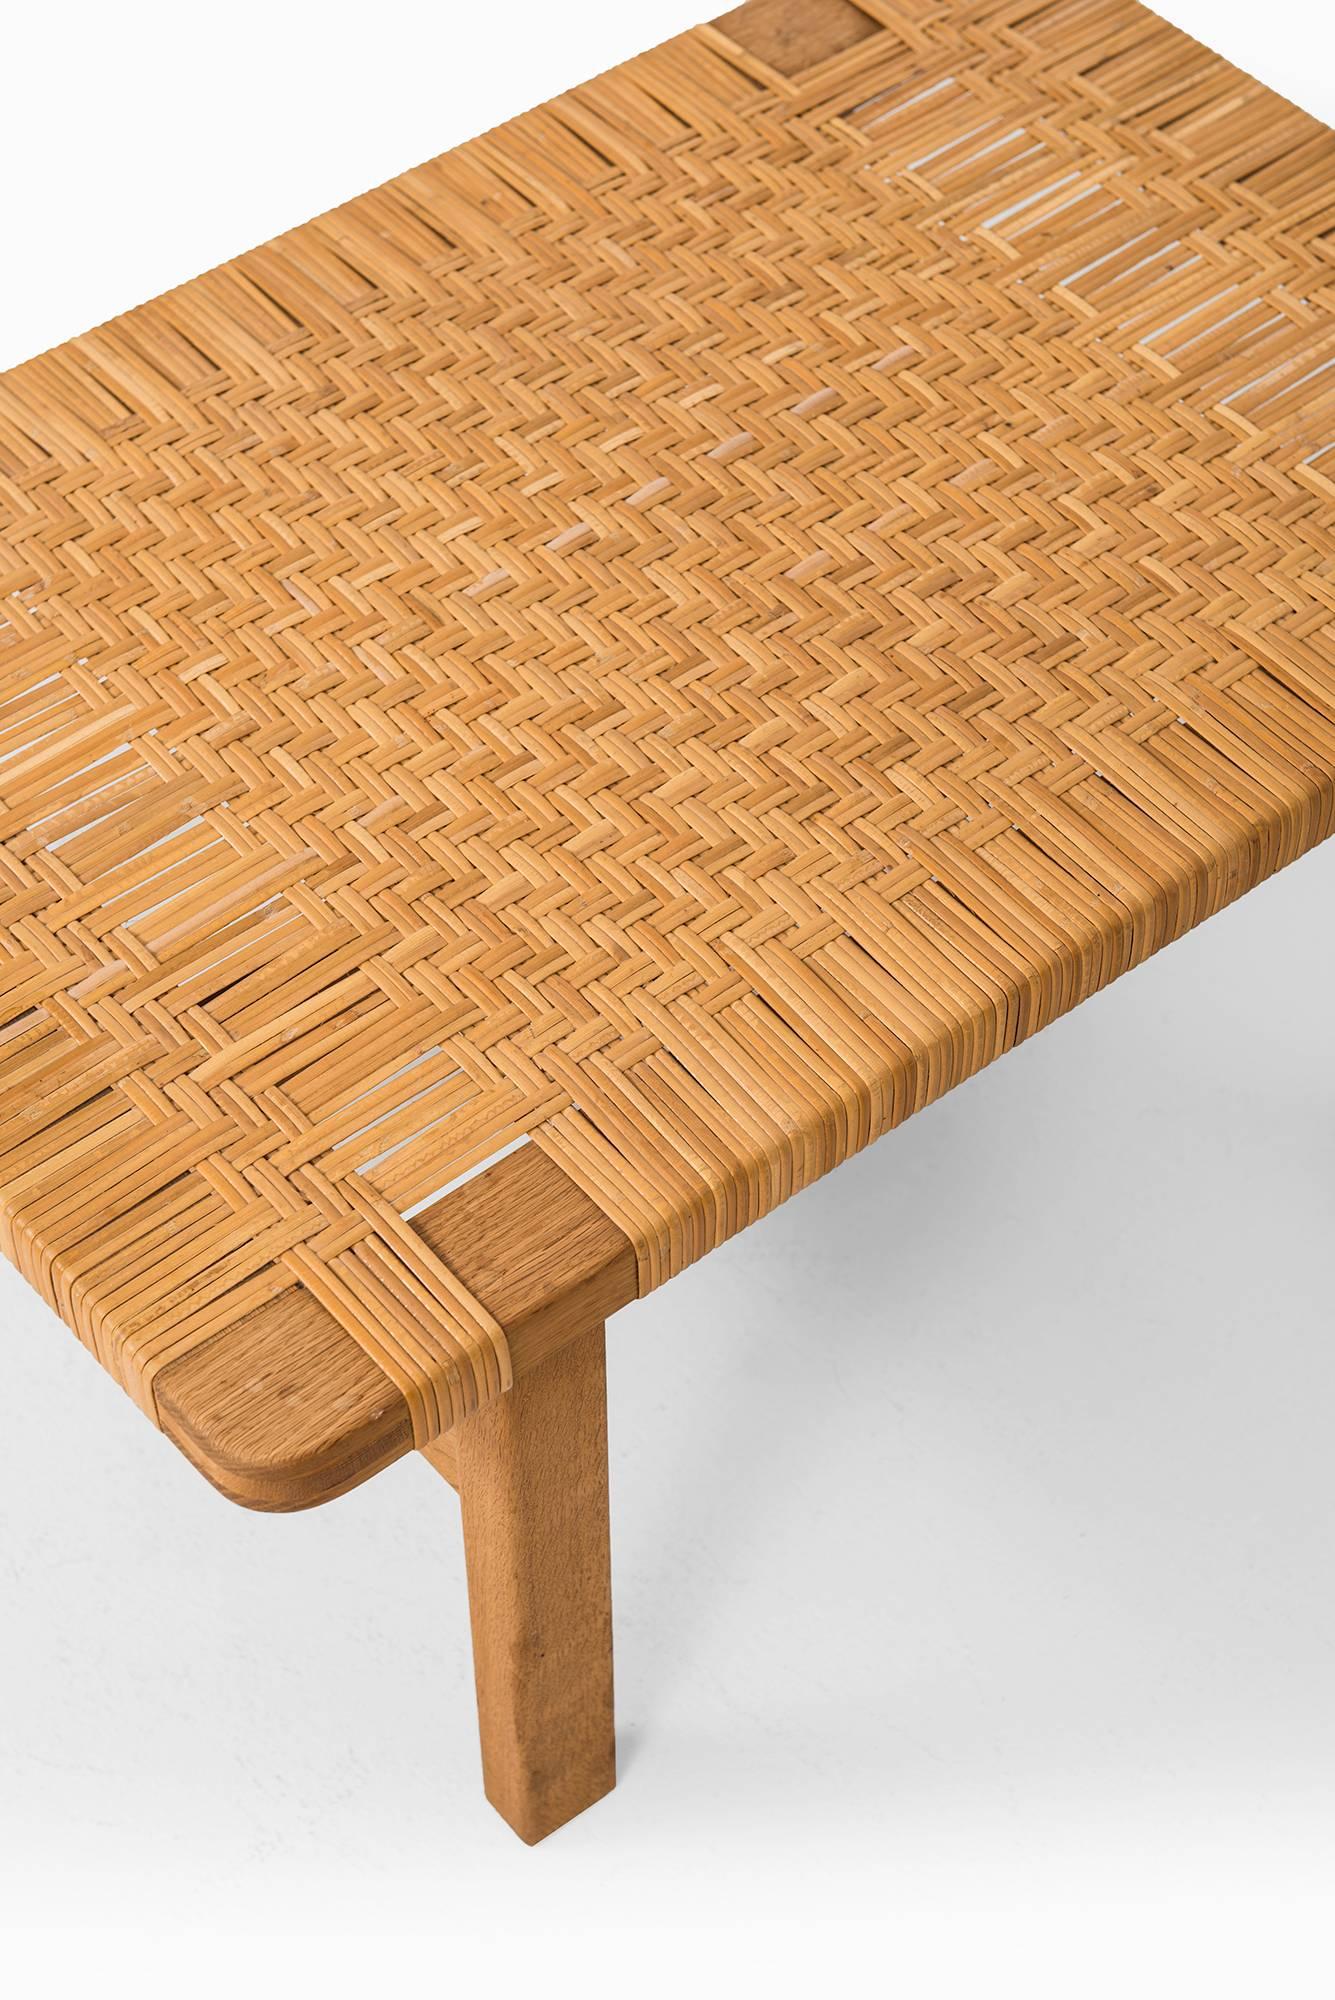 Børge Mogensen Side Table in Woven Cane by Fredericia in Denmark 1